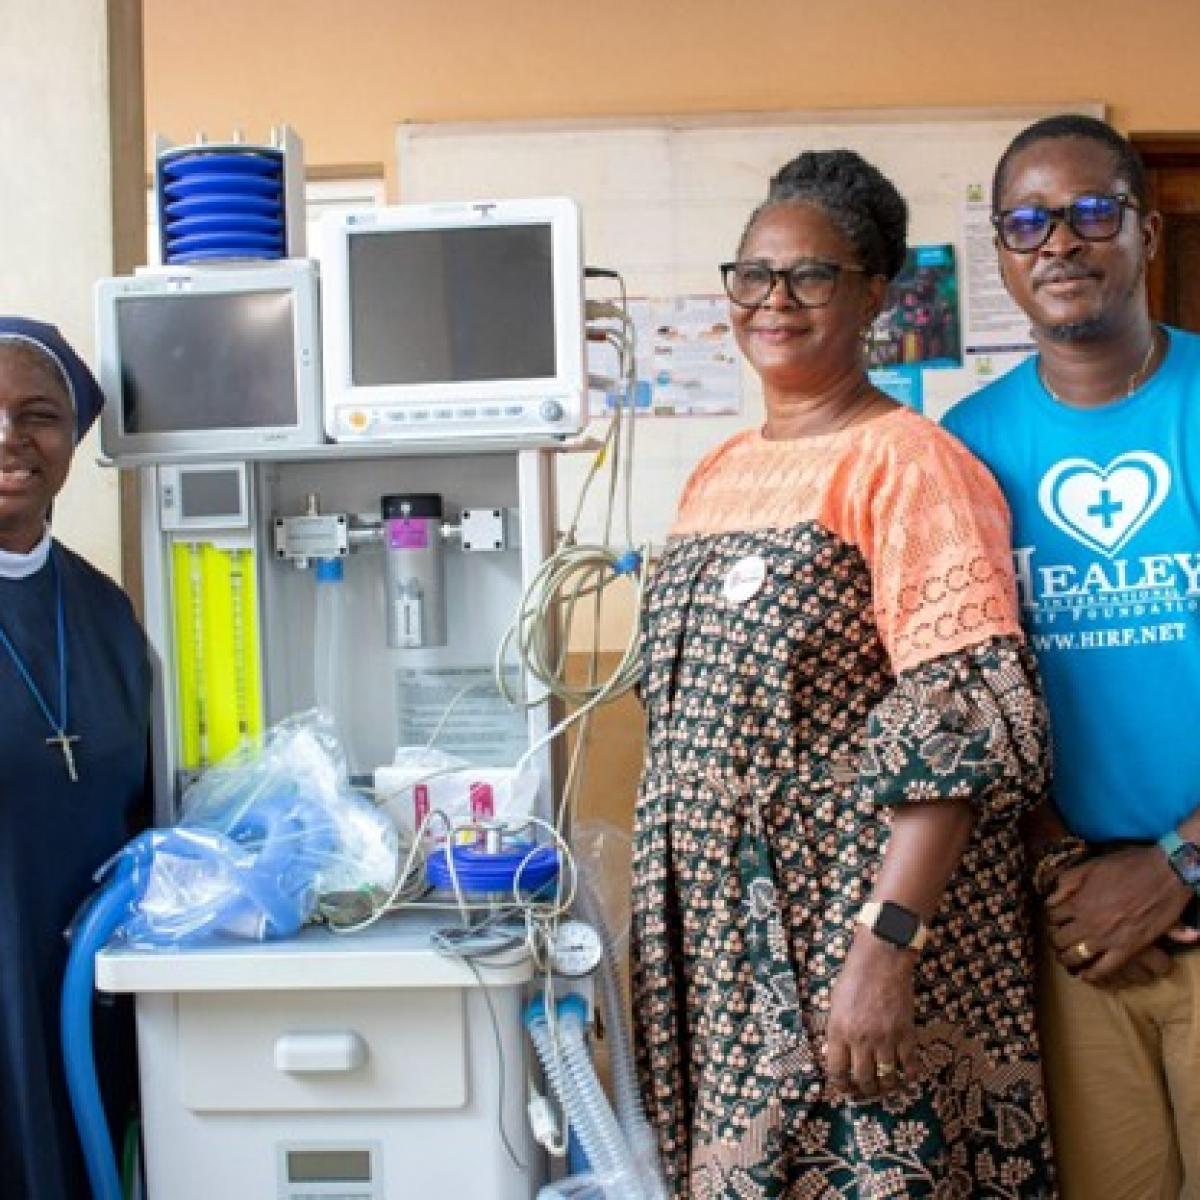 From left to right Rev. Sr Josephine Amara Health Coordinator, Grace Elysbeth Jones Human Resources and Evaluation Expert and Ishmeal Alfred Charles In-country Manager, Healey International Relief Foundation, Sierra Leone.